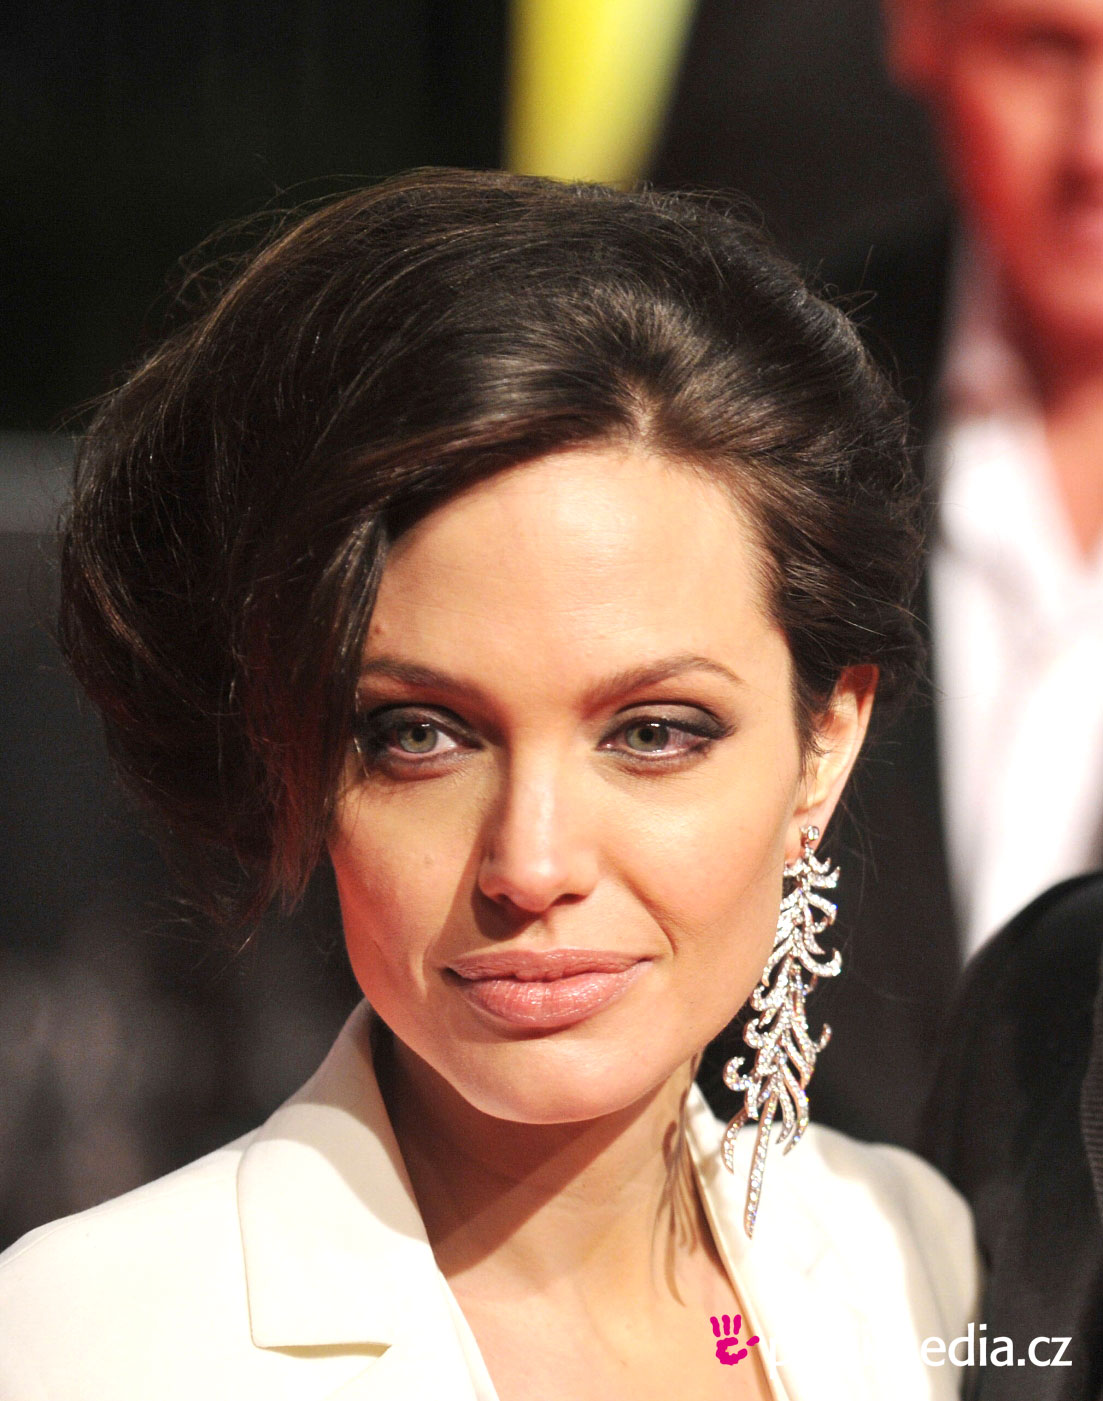 Angelina Jolie Hairstyles, Long Hairstyle 2011, Hairstyle 2011, New Long Hairstyle 2011, Celebrity Long Hairstyles 2033